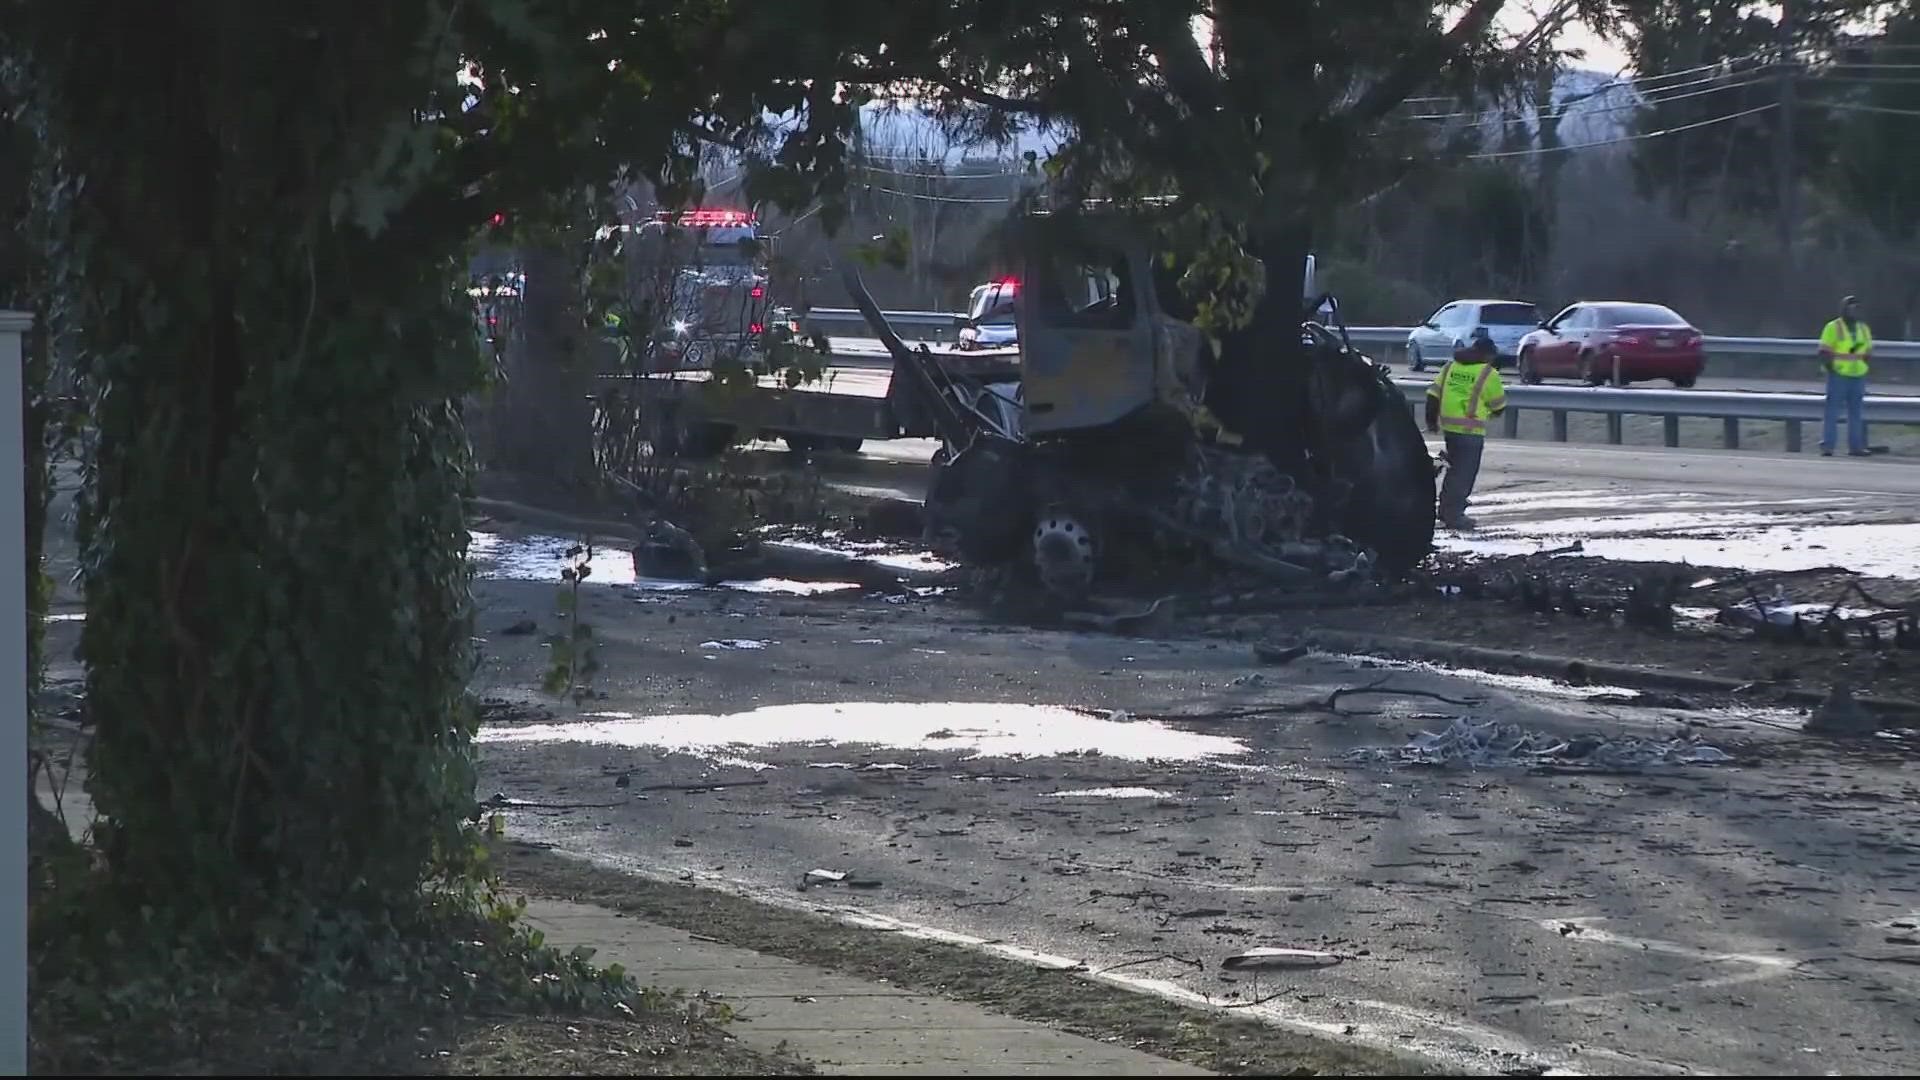 A tanker overturned right near a neighborhood – leading to one death and a lot of damage.